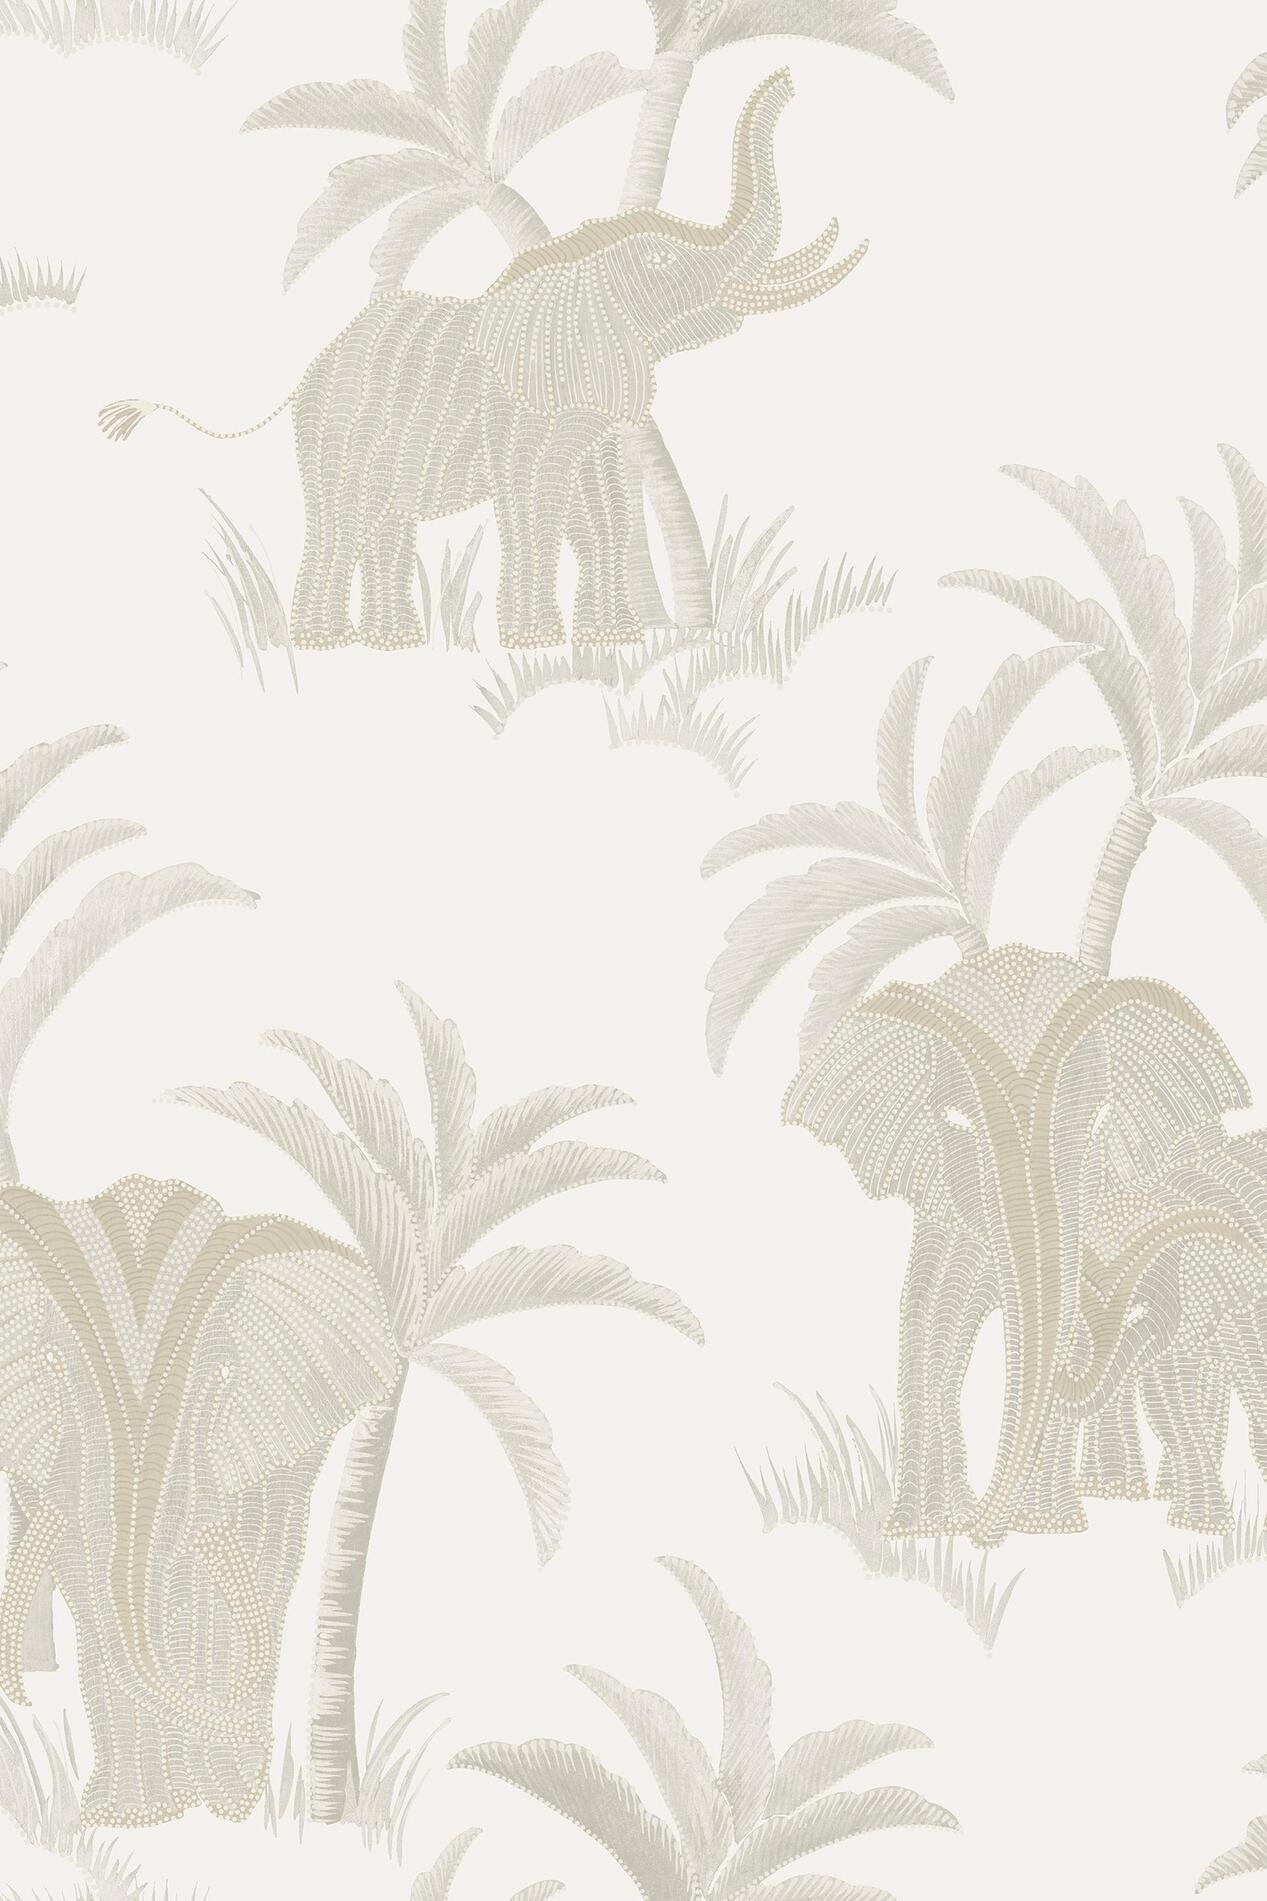 hooked-on-walls-exotique-tembo-wallcovering-17301